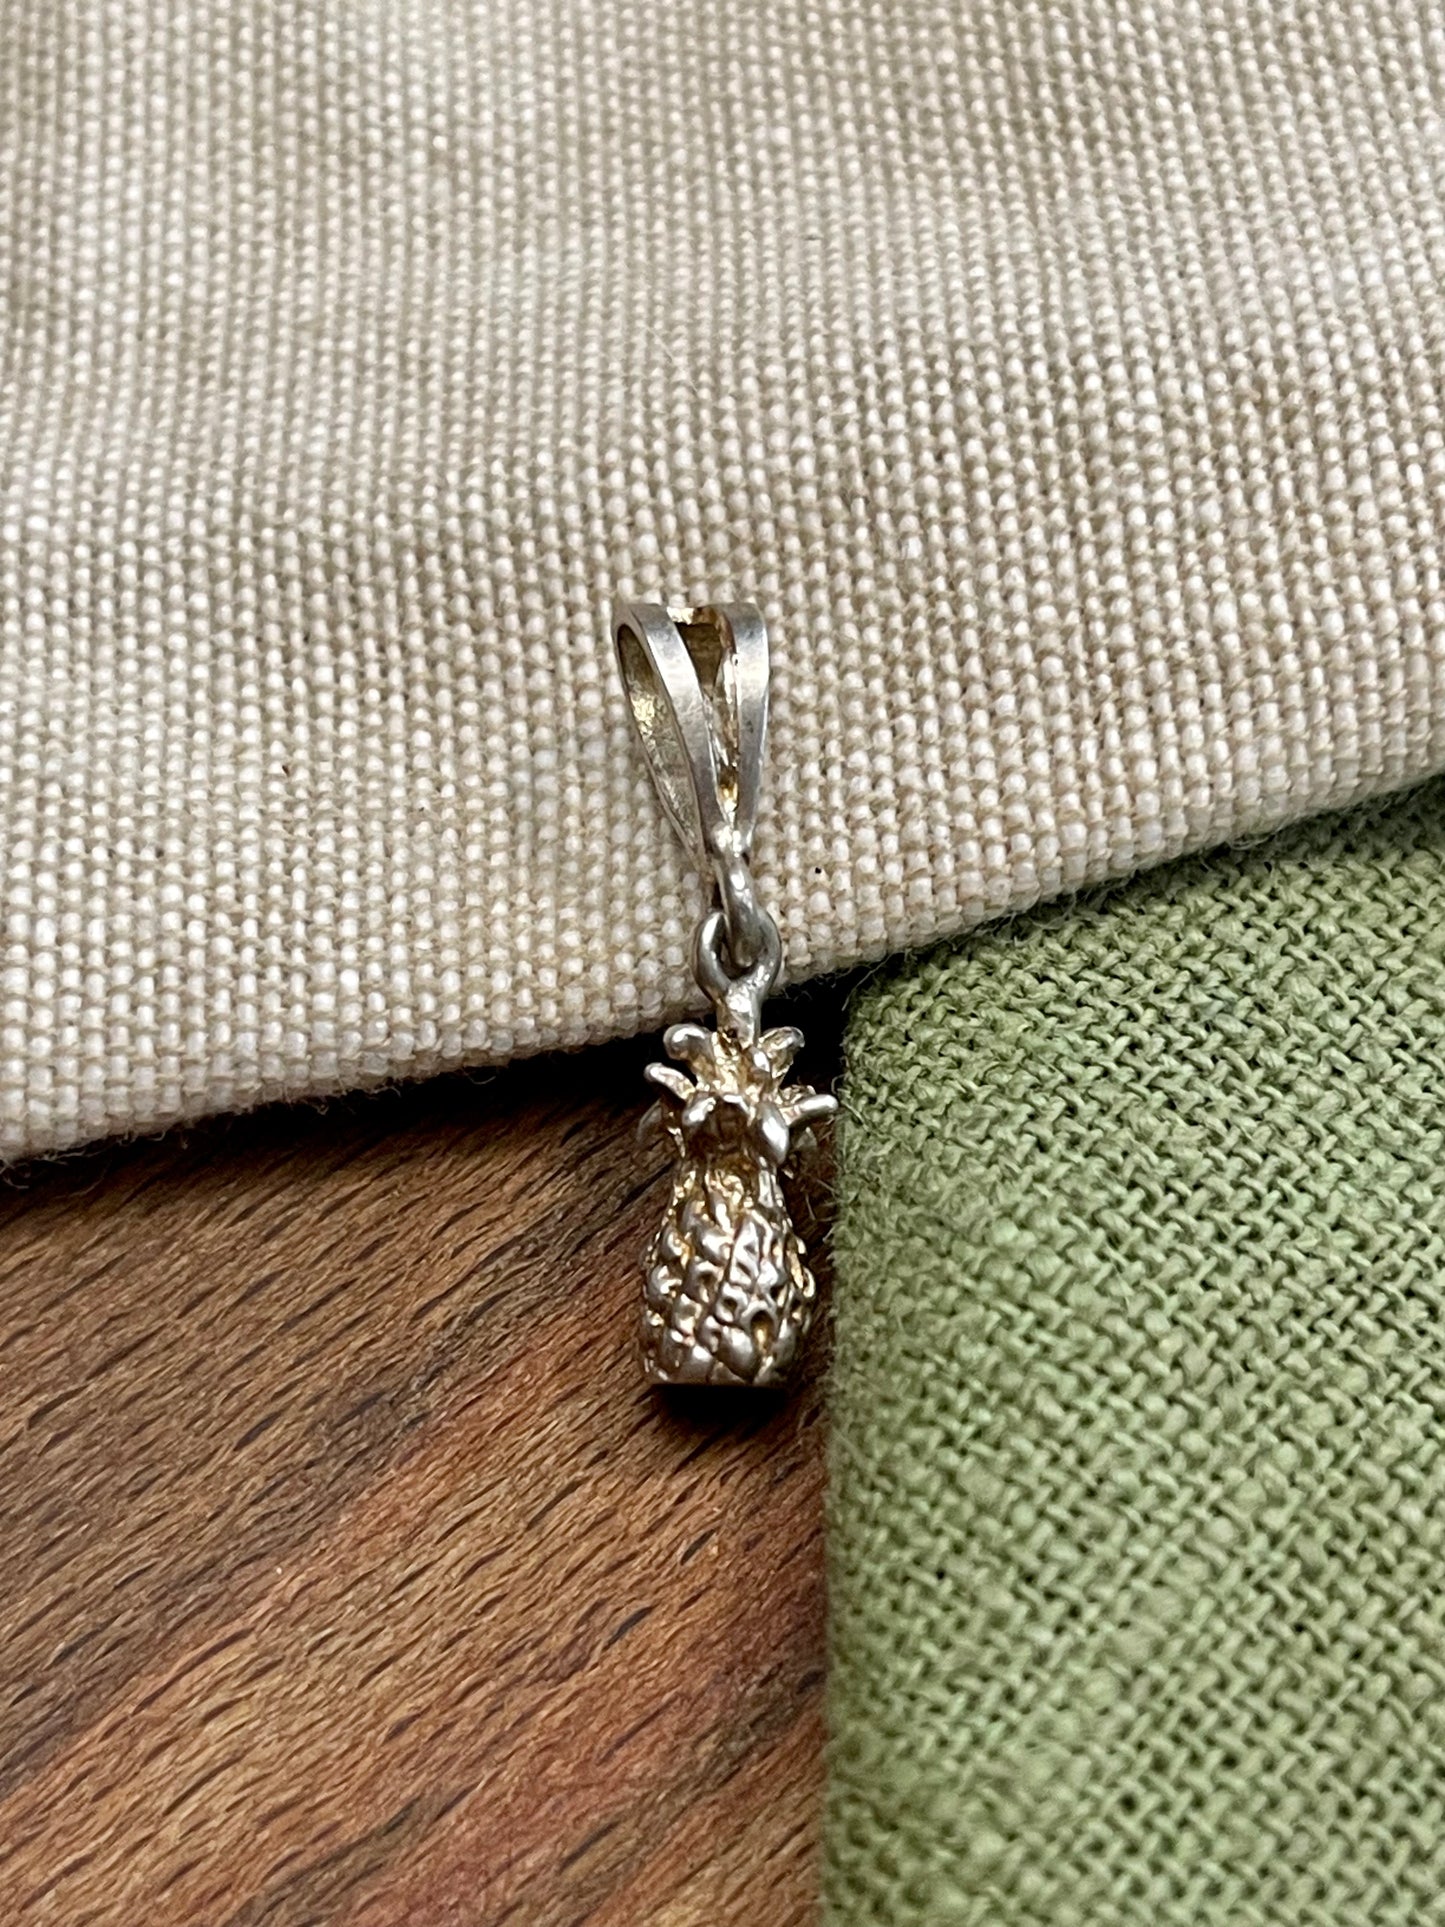 Pineapple Fruit Gift Present Medal Pendent Solid 925 Sterling Silver Jewelry